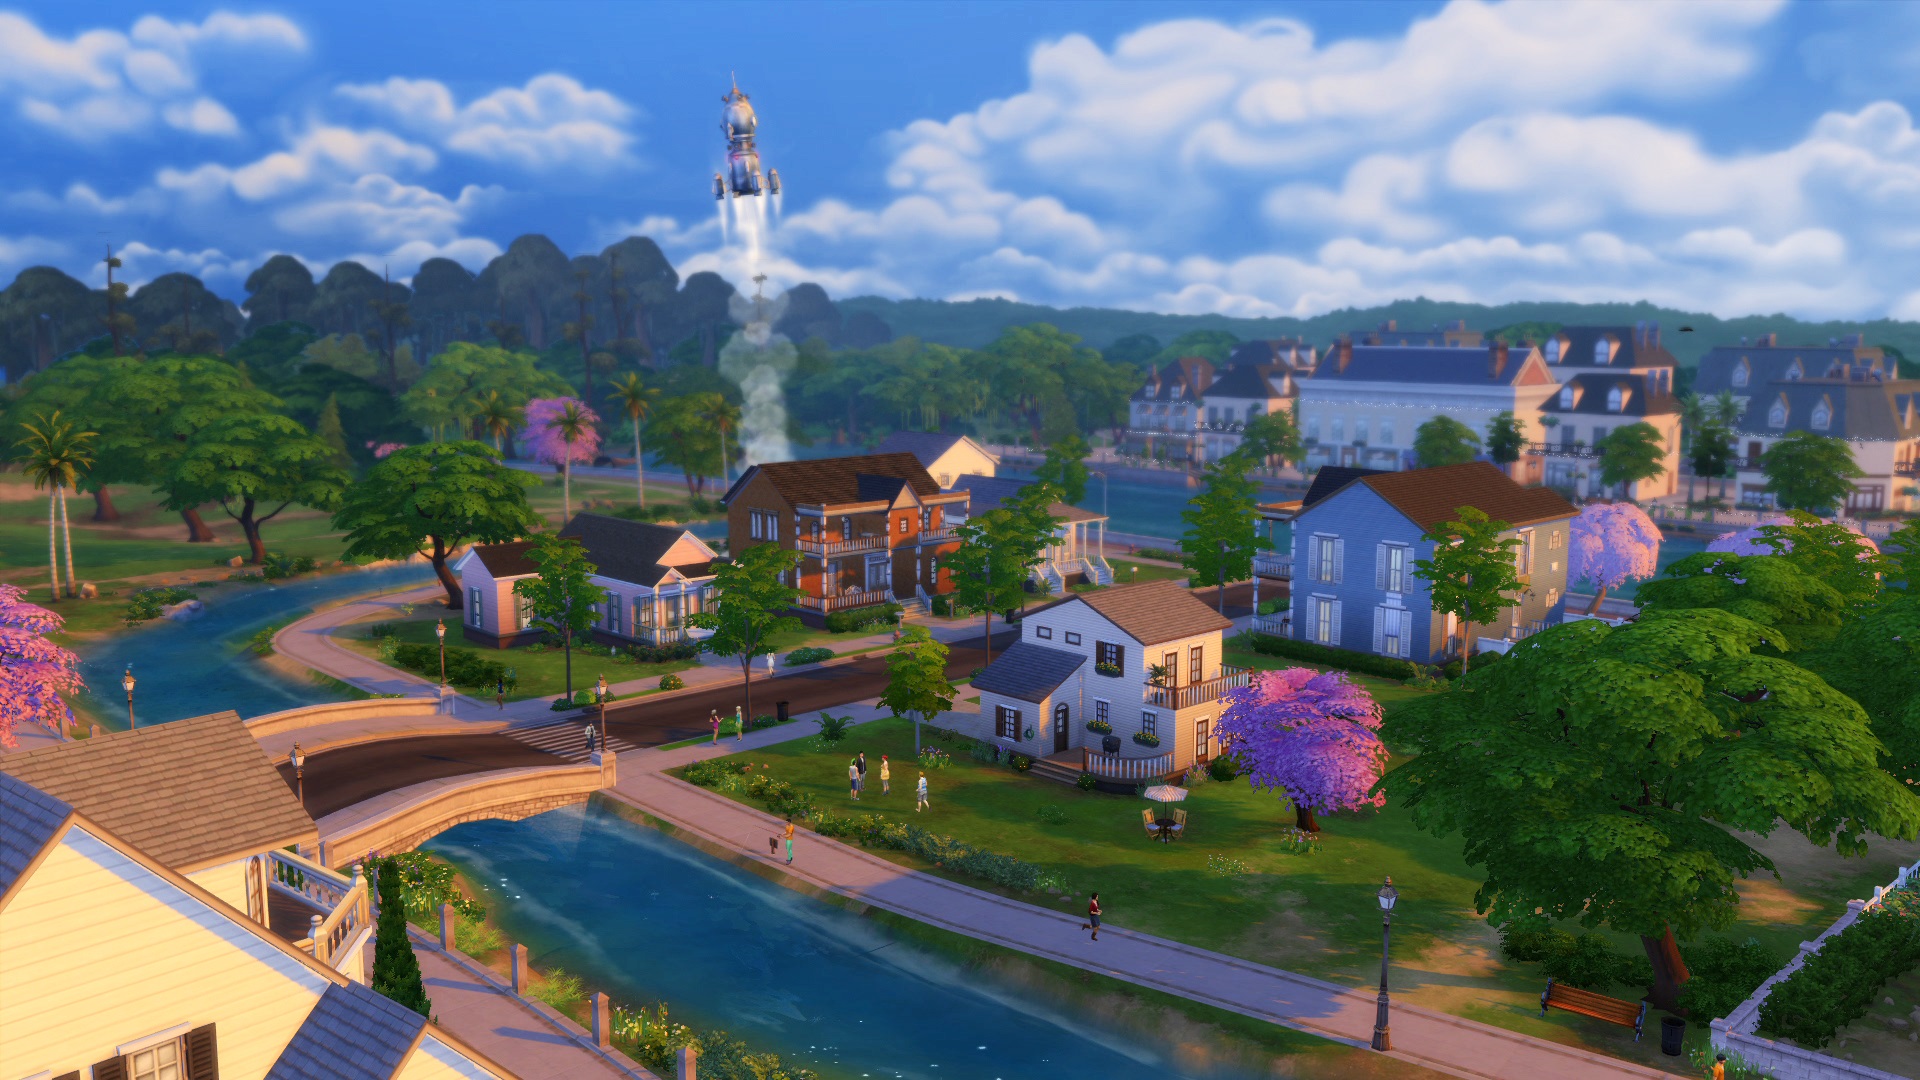 The Sims 4 neighborhood of Willow Creek. A residential area with houses and a river running under a bridge. A rocket is taking off in the distance.